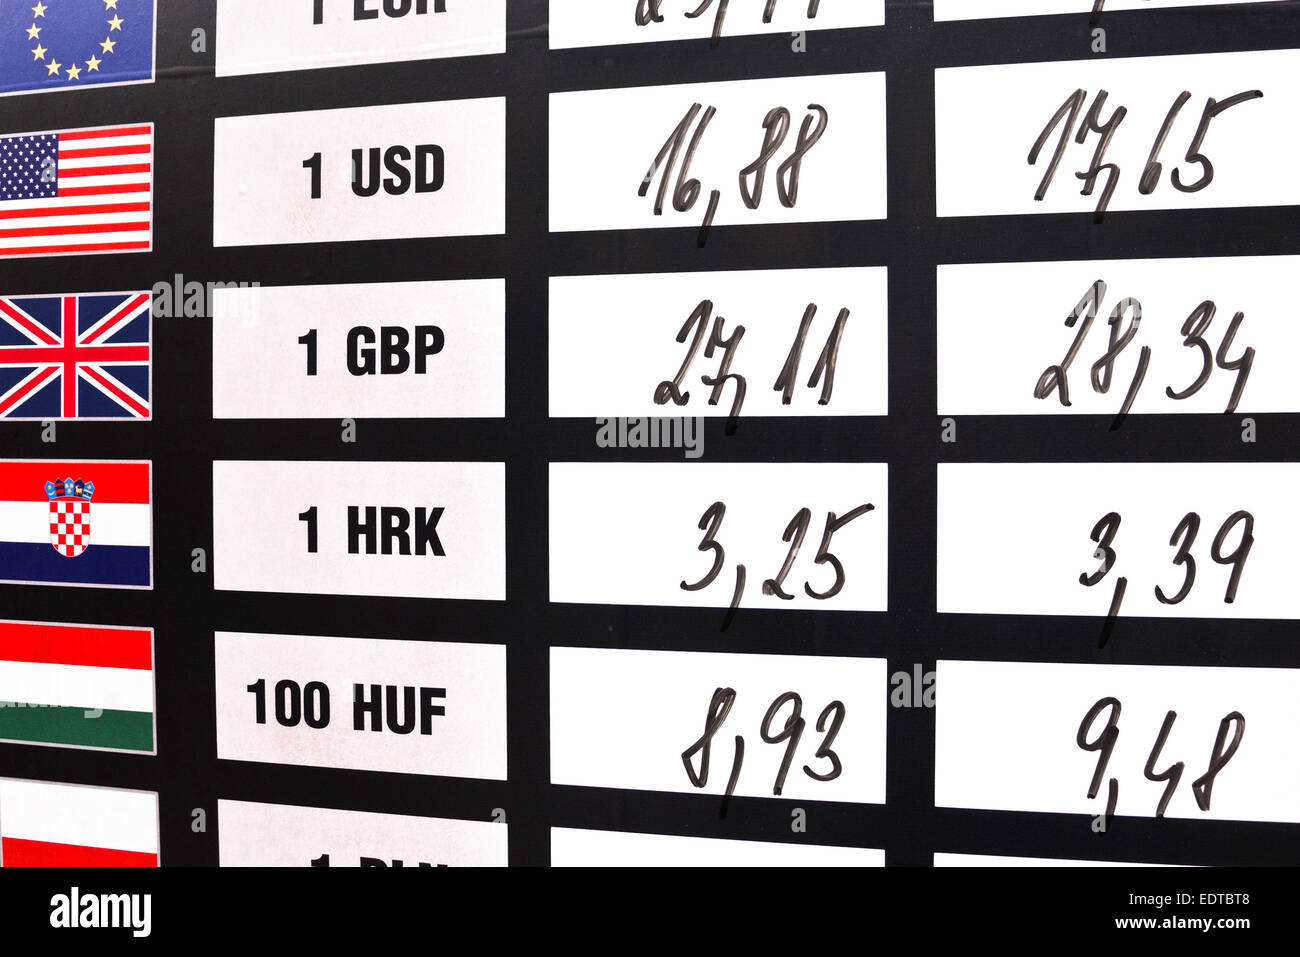 board with currencies and exchange rates Stock Photo